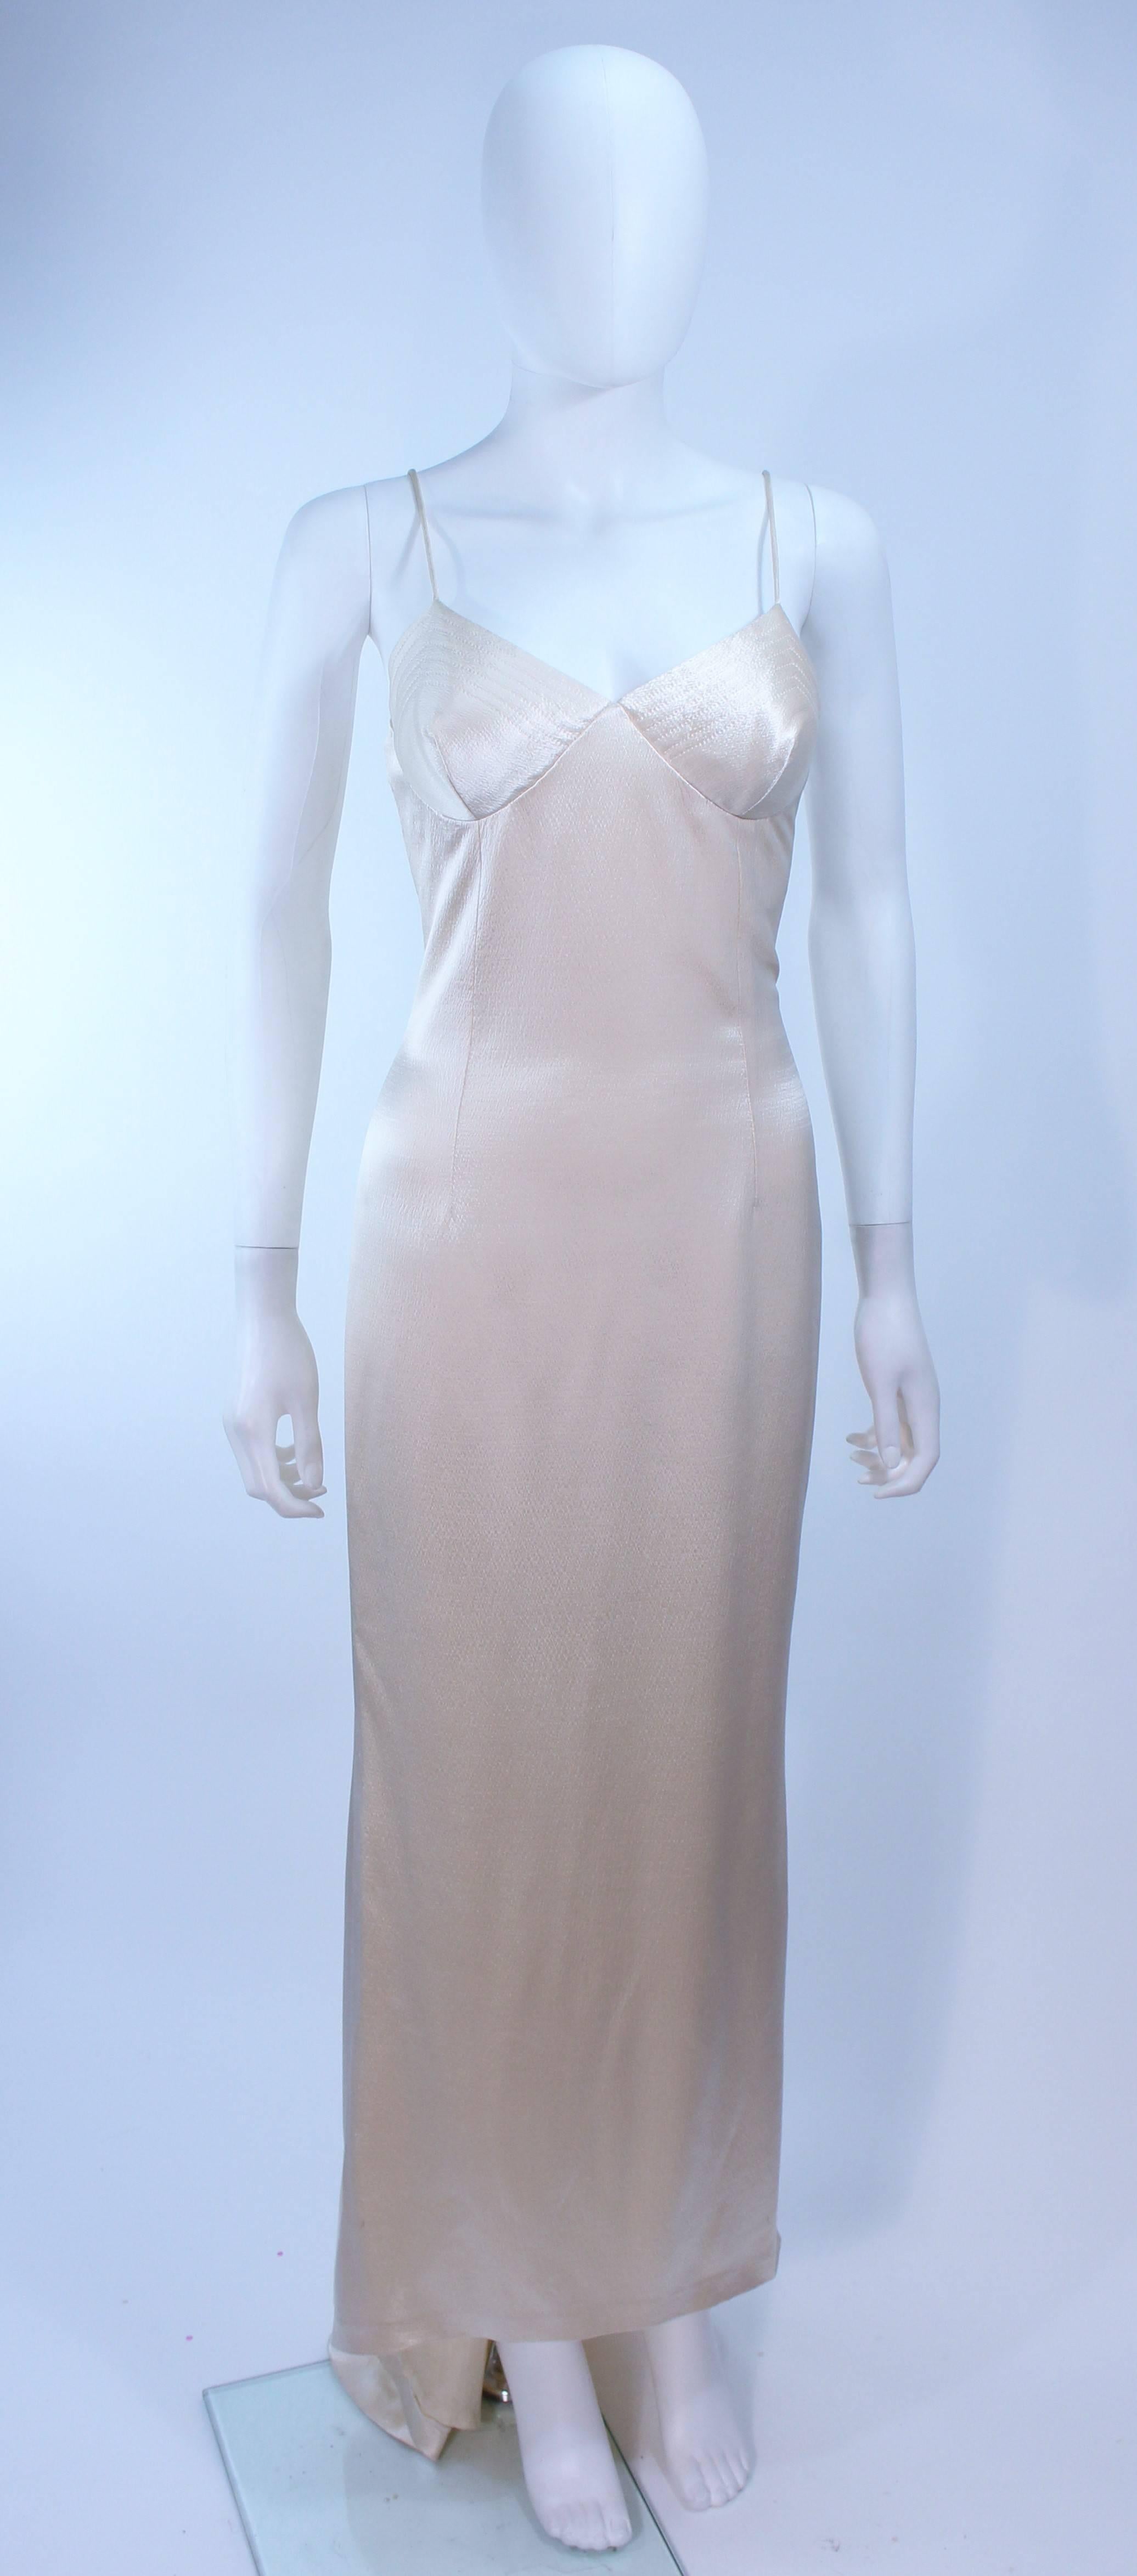 This gown is composed of an off white wool and silk blend with a top stitch bust detail. Features a train. There is a center back zipper closure with a hook and eye. In excellent vintage condition.

**Please cross-reference measurements for